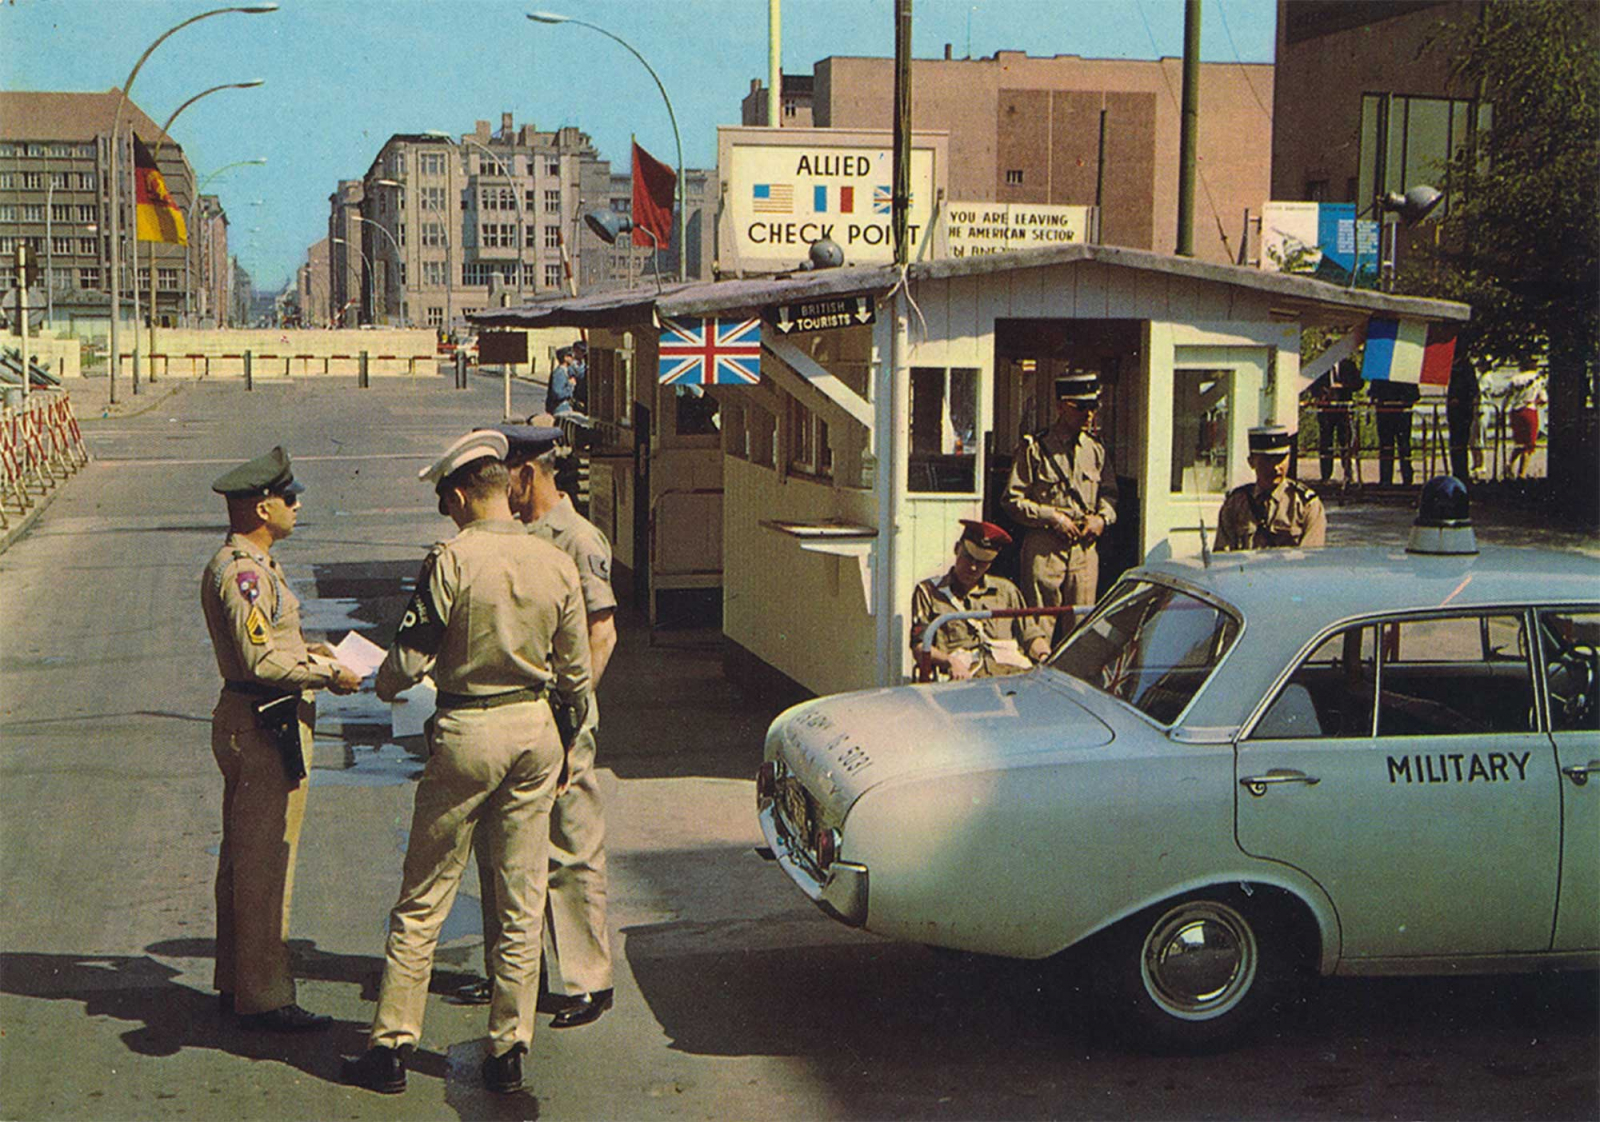 US military police officers in front of the Allied Checkpoint Charlie, with the GDR border installations in the background.